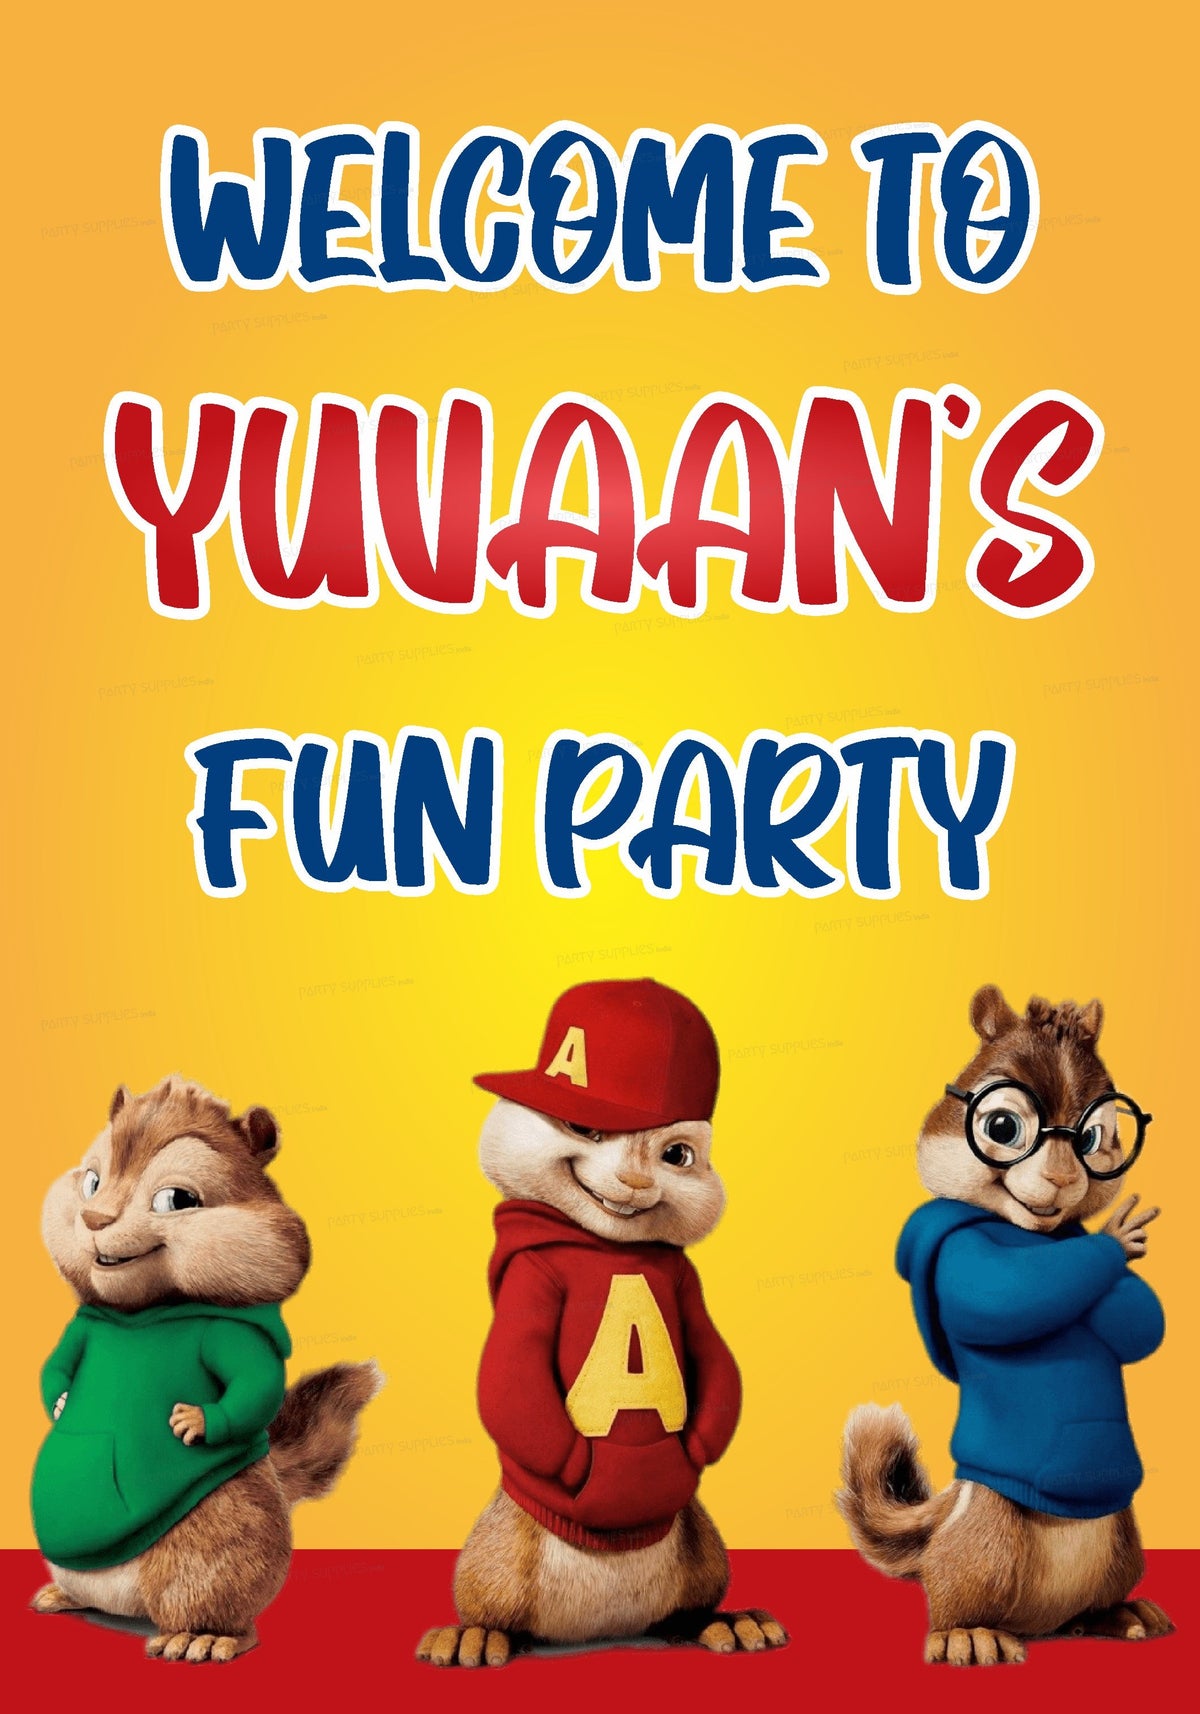 PSI Alvin and Chipmunks Theme Customized Welcome Board